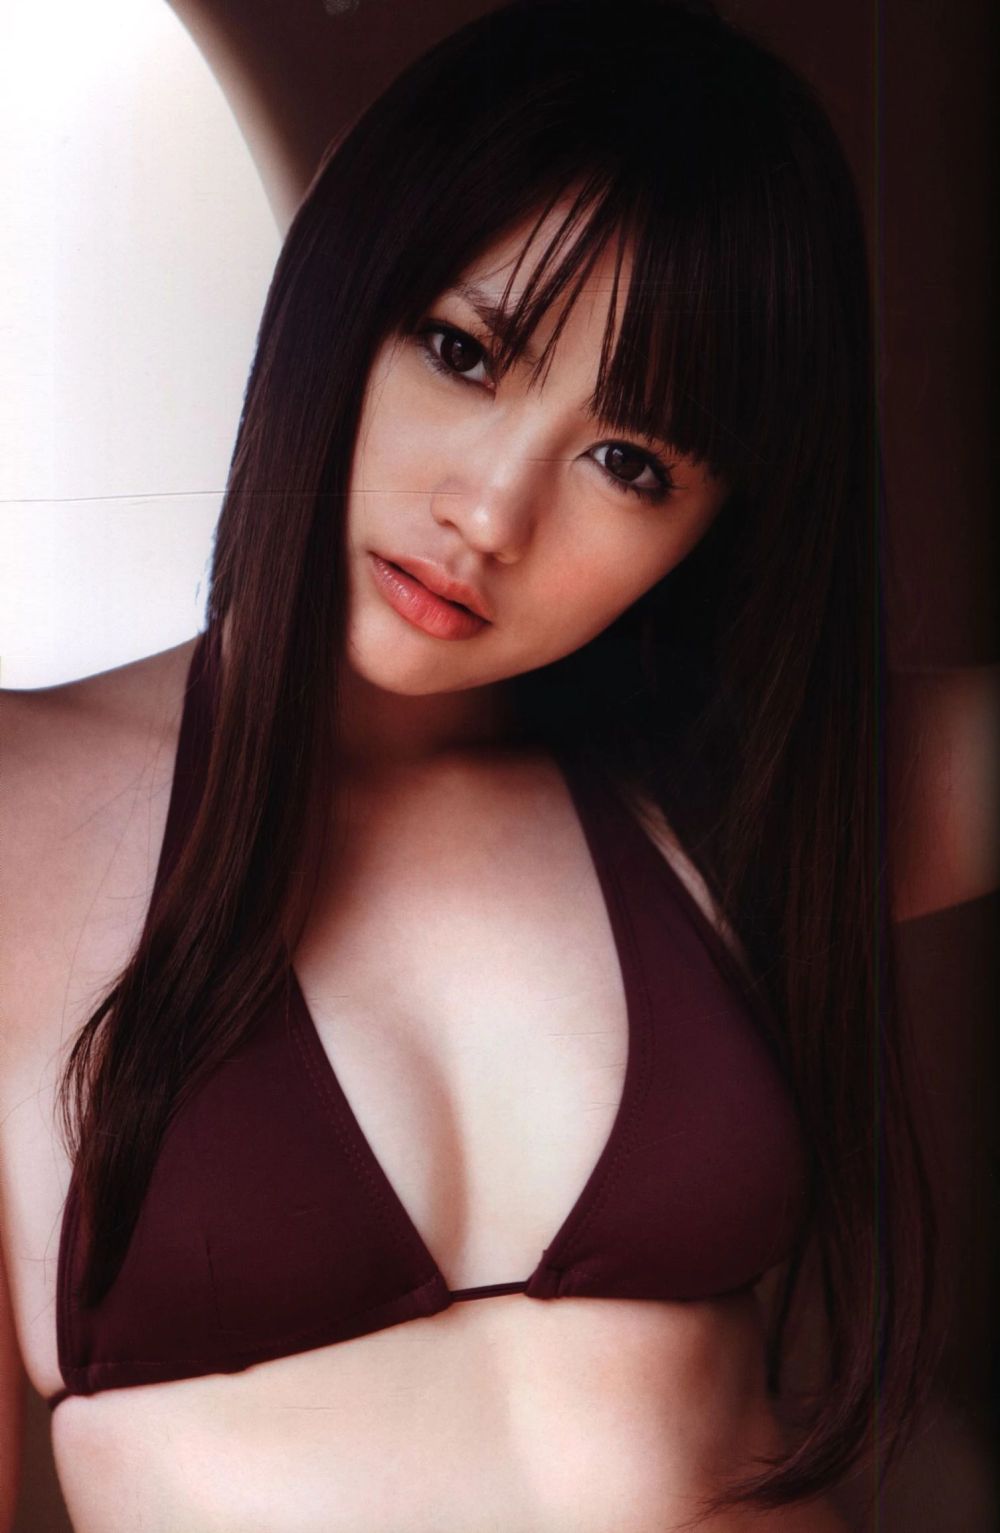 Shiho Sexy and Hottest Photos , Latest Pics